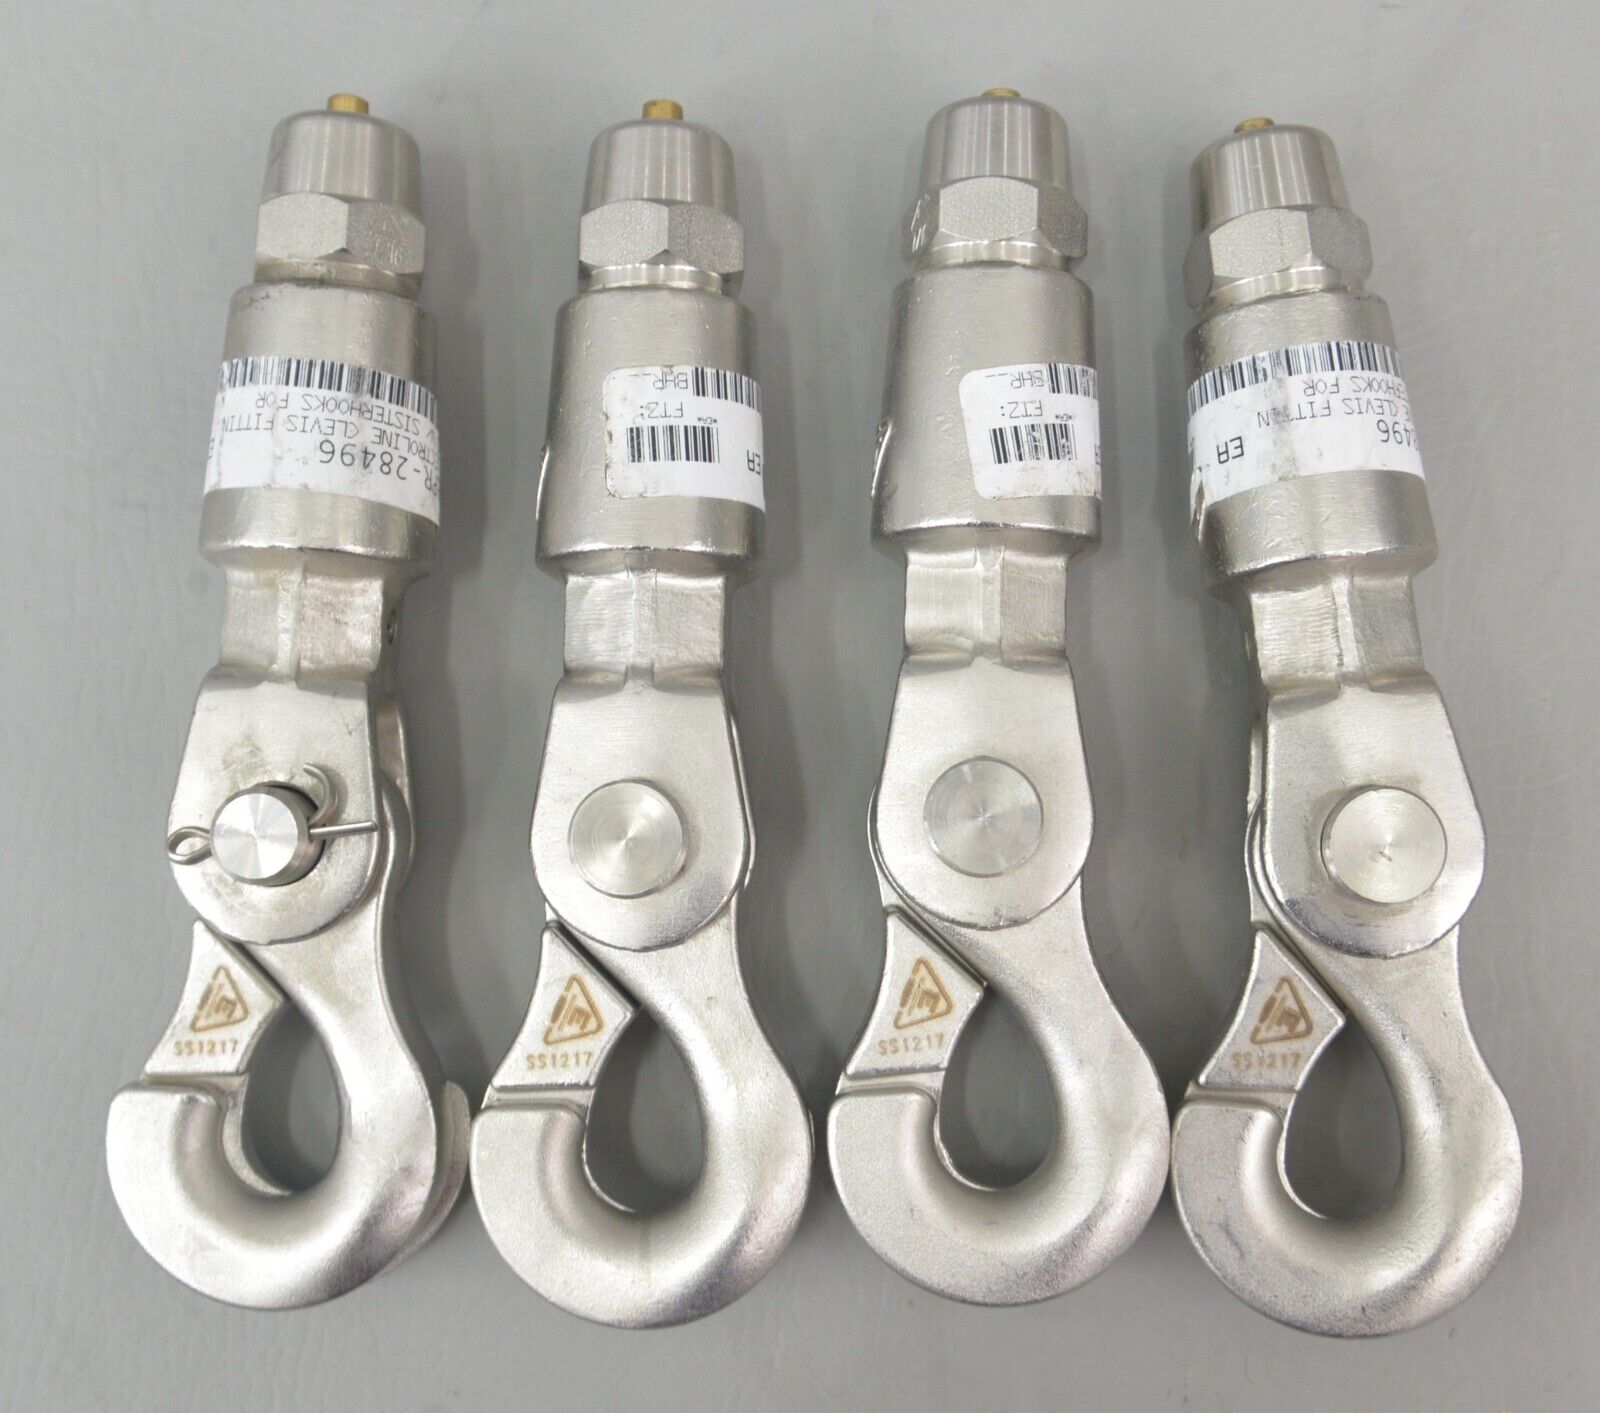 Lot of 4 Electroline Clevis Fittings with Sister Hooks 7/16